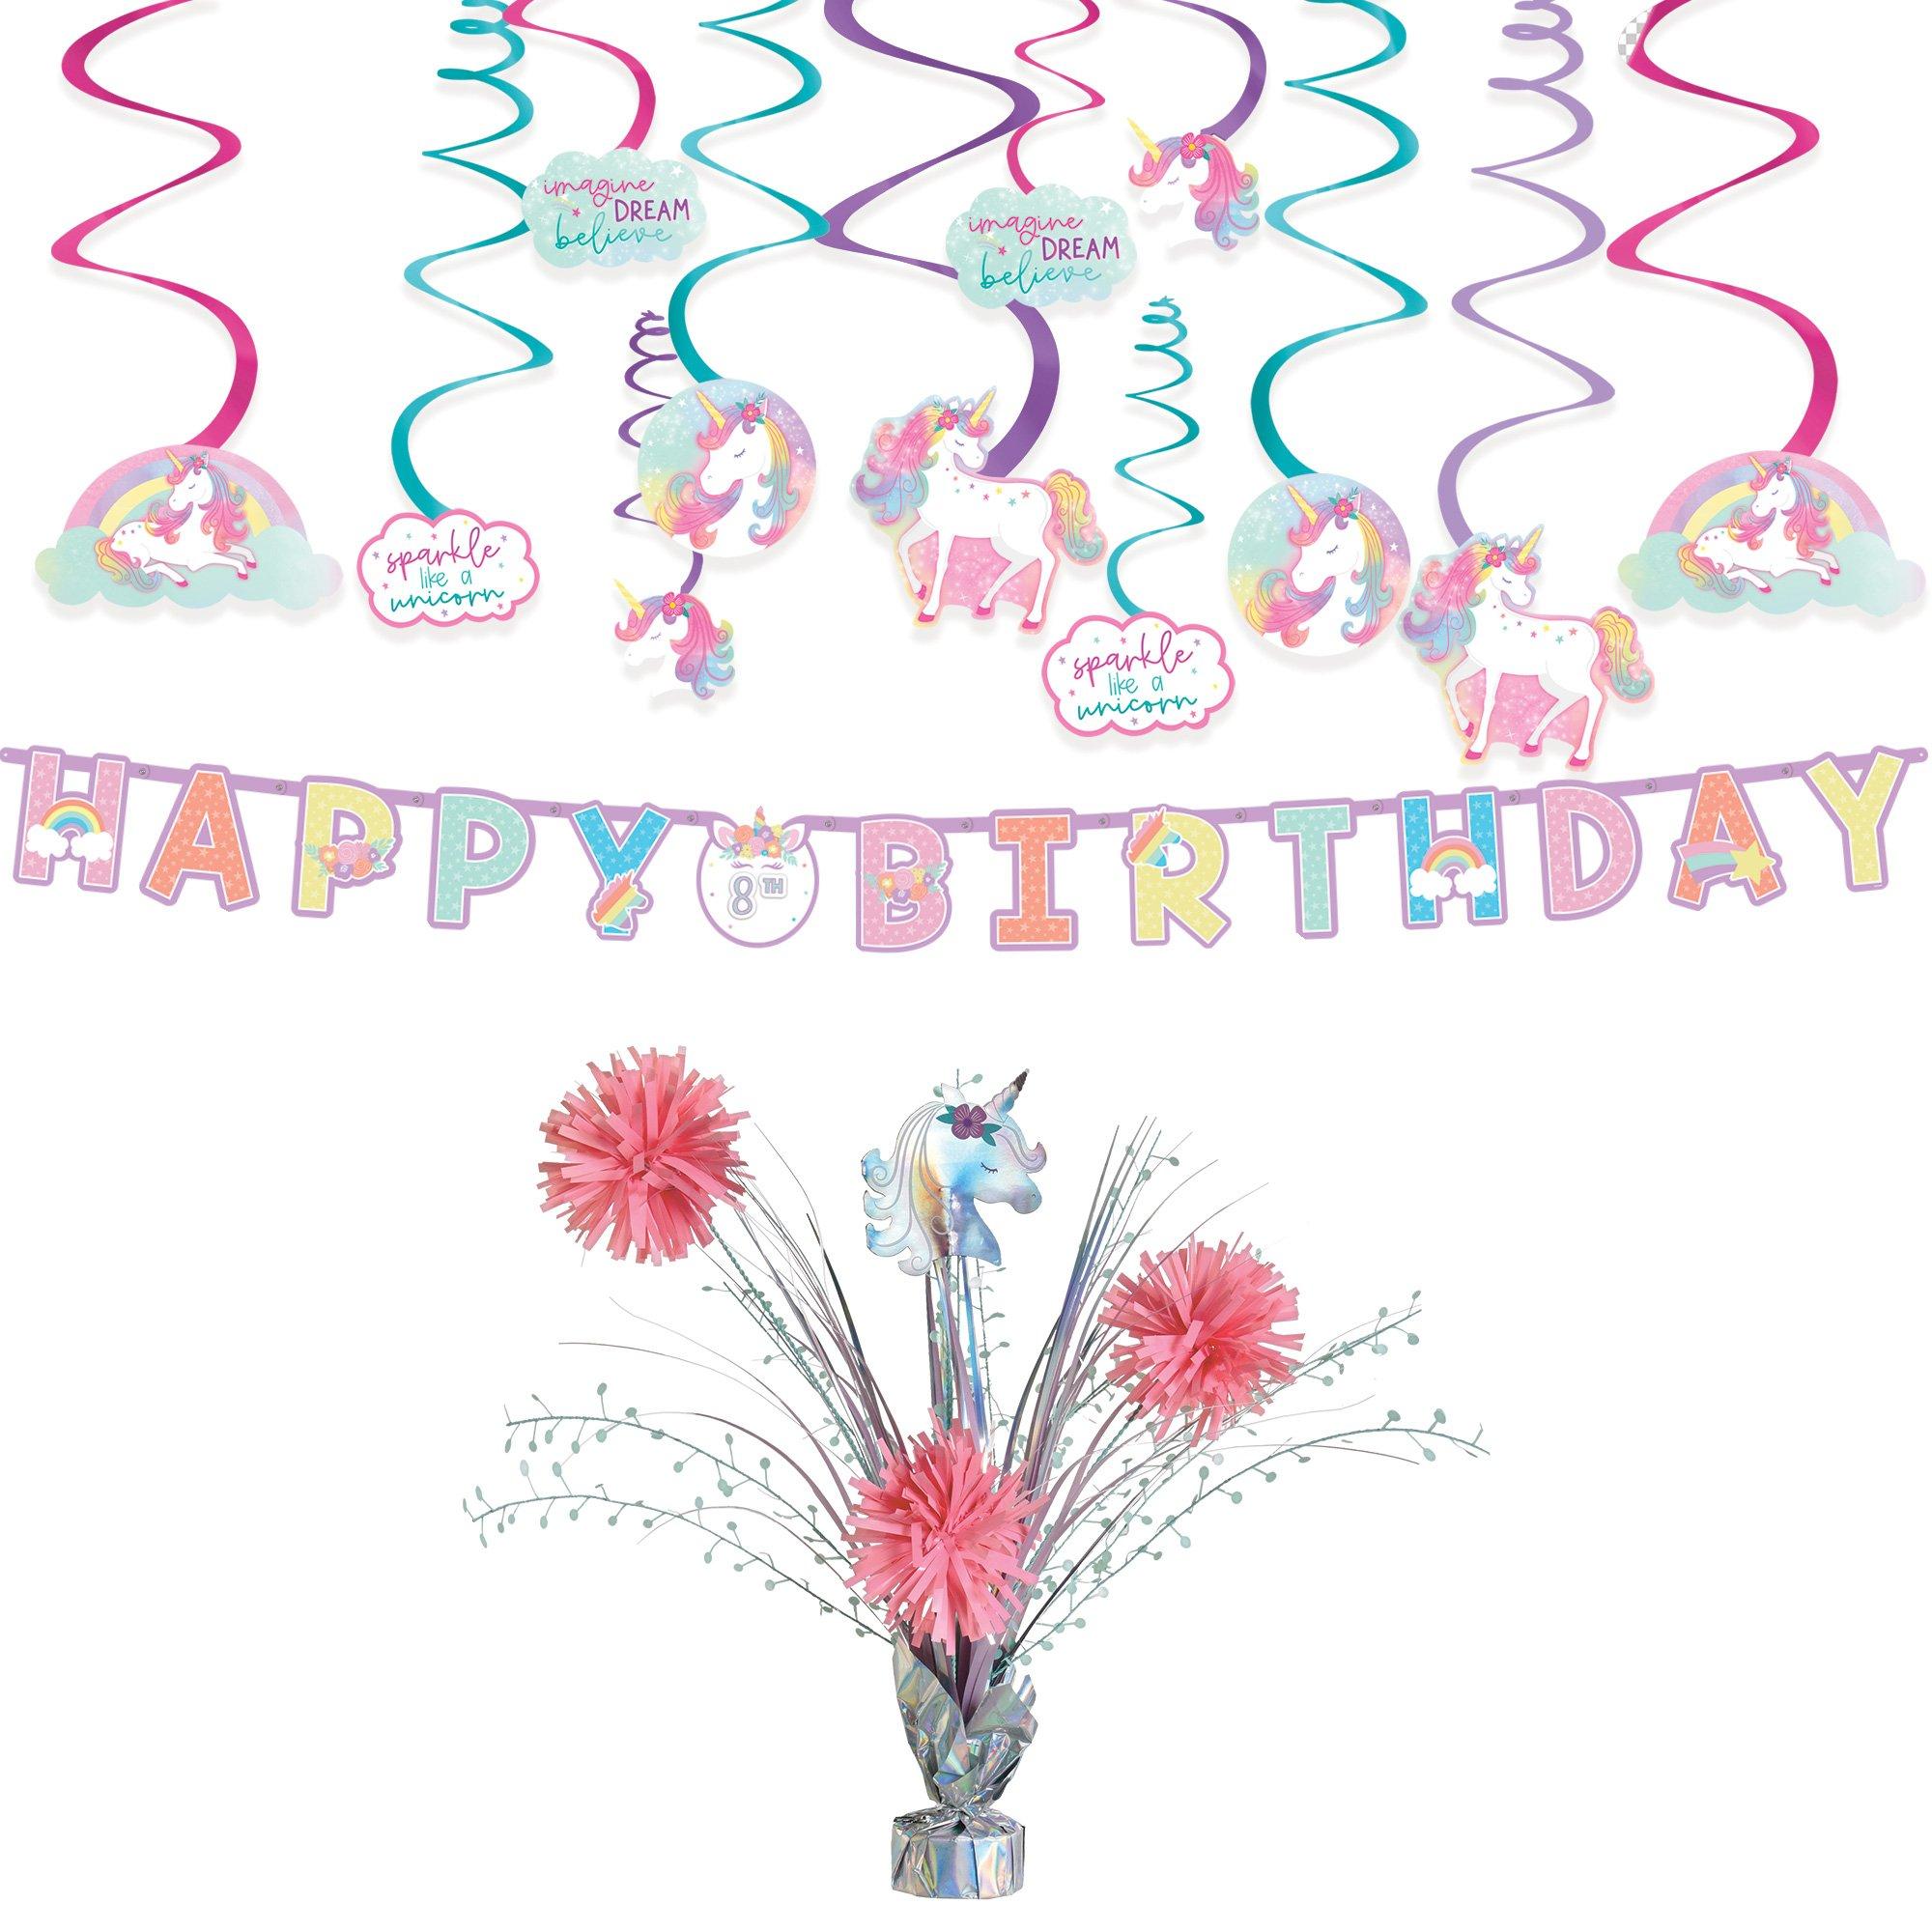 Enchanted Unicorn Party Decorating Supplies Pack - Kit Includes Banner, Swirl Decorations & Centerpiece